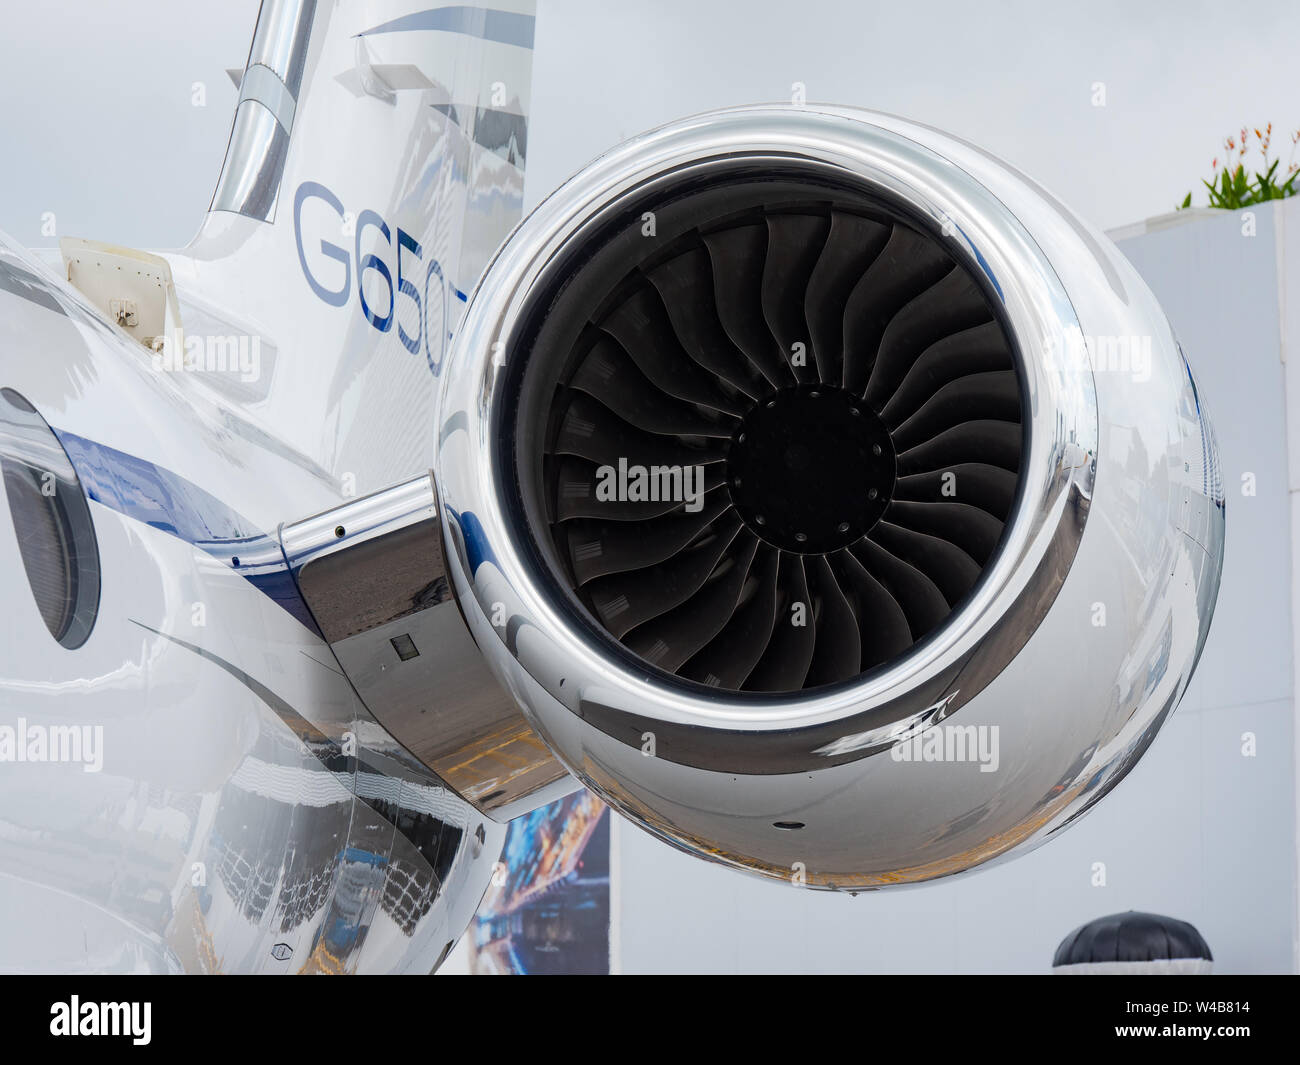 Singapore - February 4, 2018: Tail plane and engine of Gulfstream G650ER business jet on display during Singapore Airshow at Changi Exhibition Centre Stock Photo